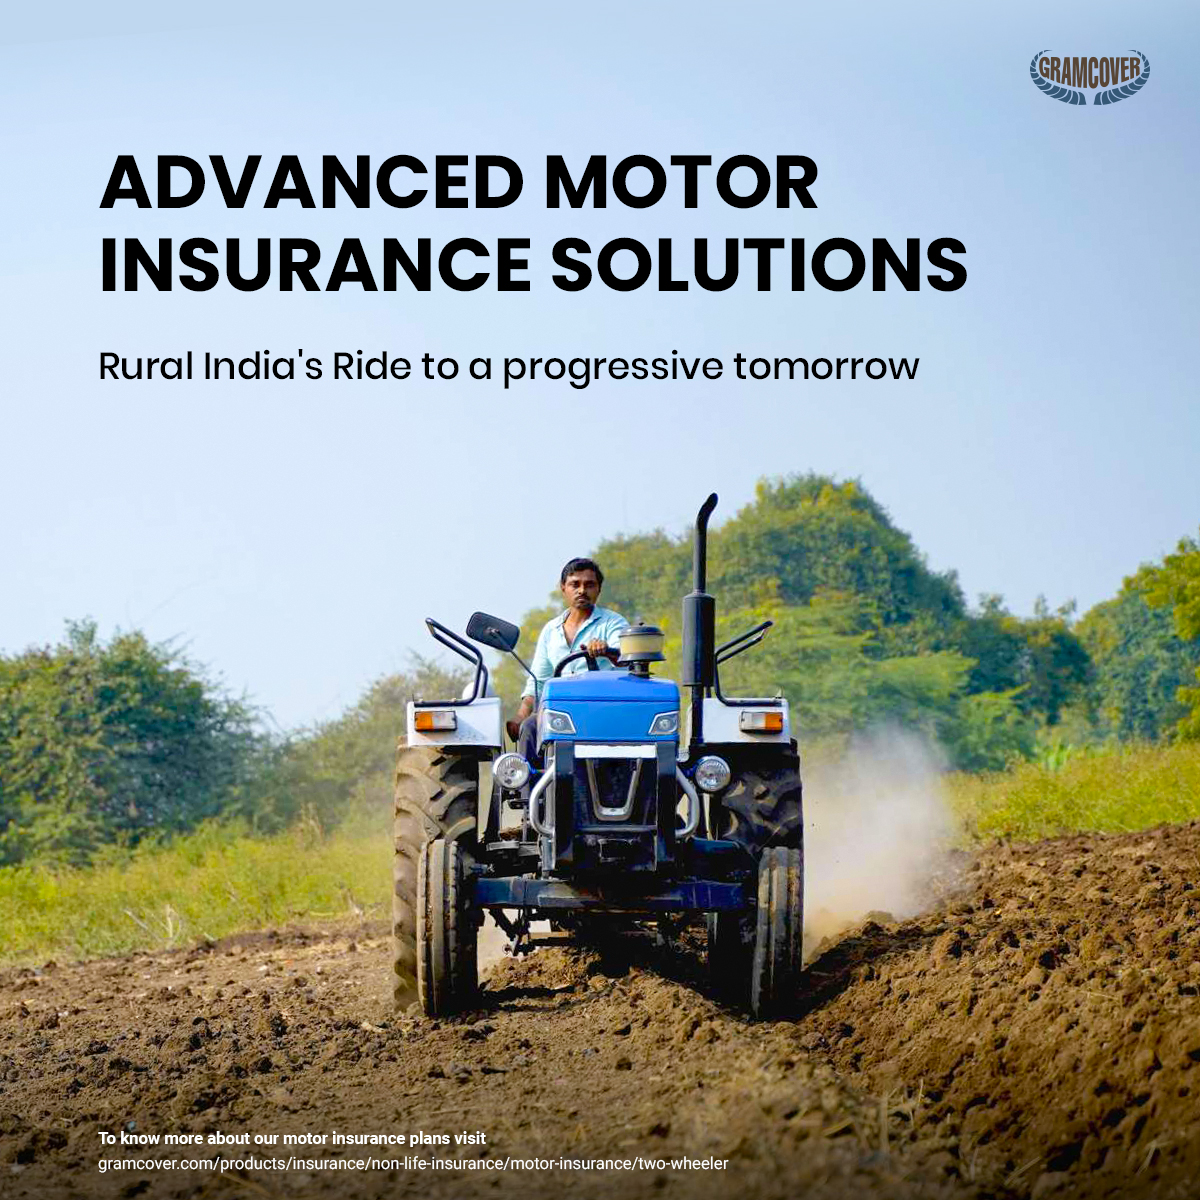 GramCover on X: We are on a journey to make rural India's safer